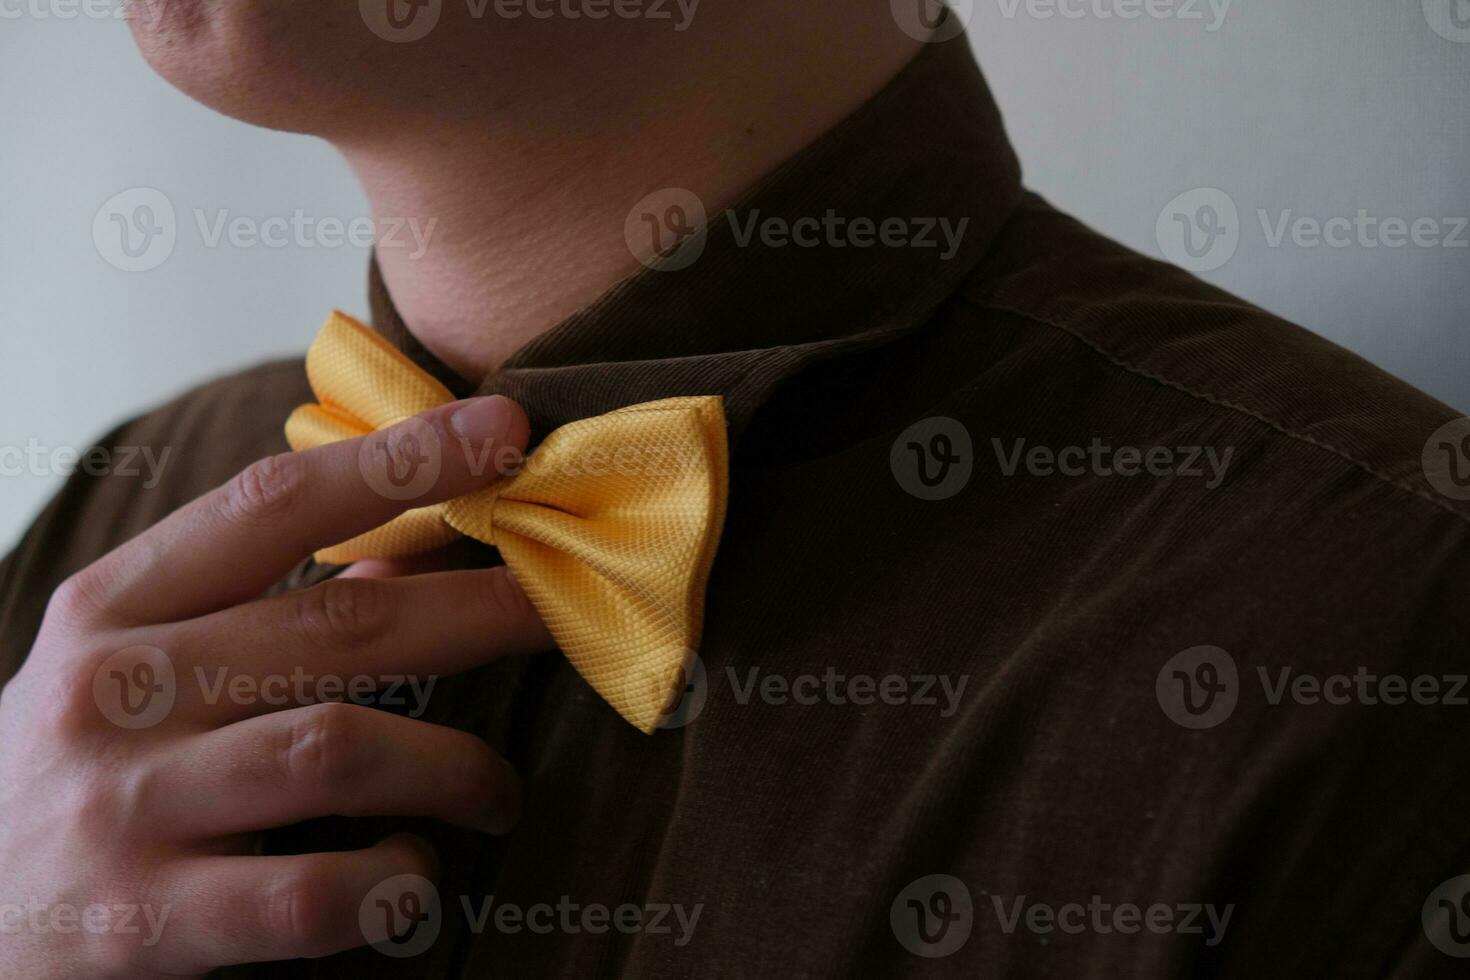 In the photo a man's white hand is holding a golden bow tie